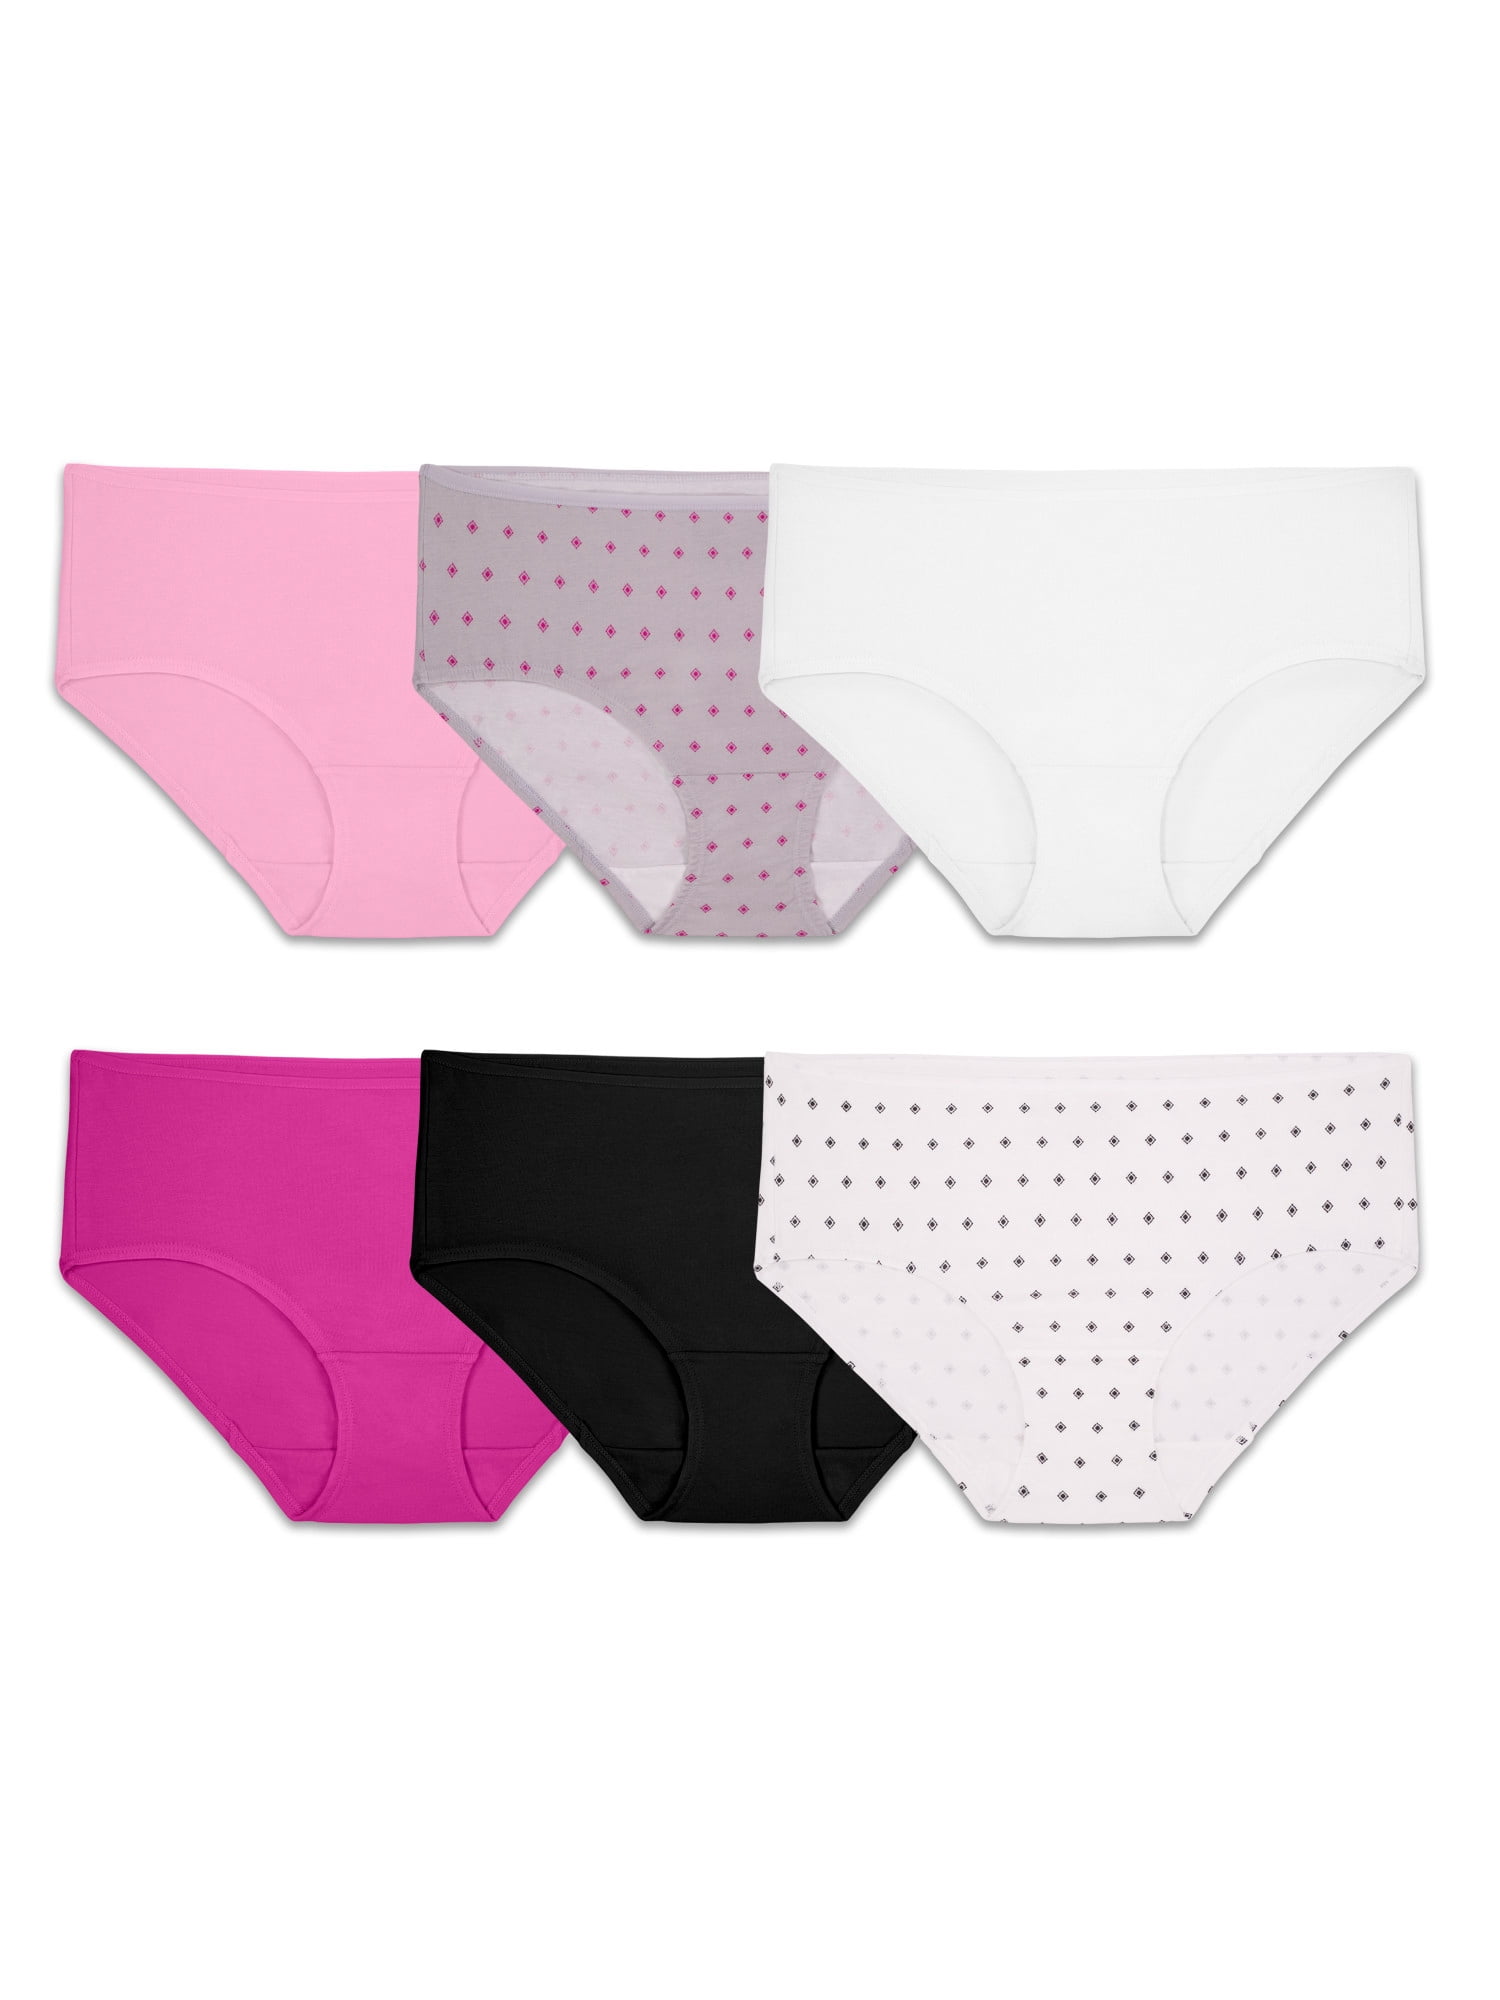 Friut Of The Loom Panties Images